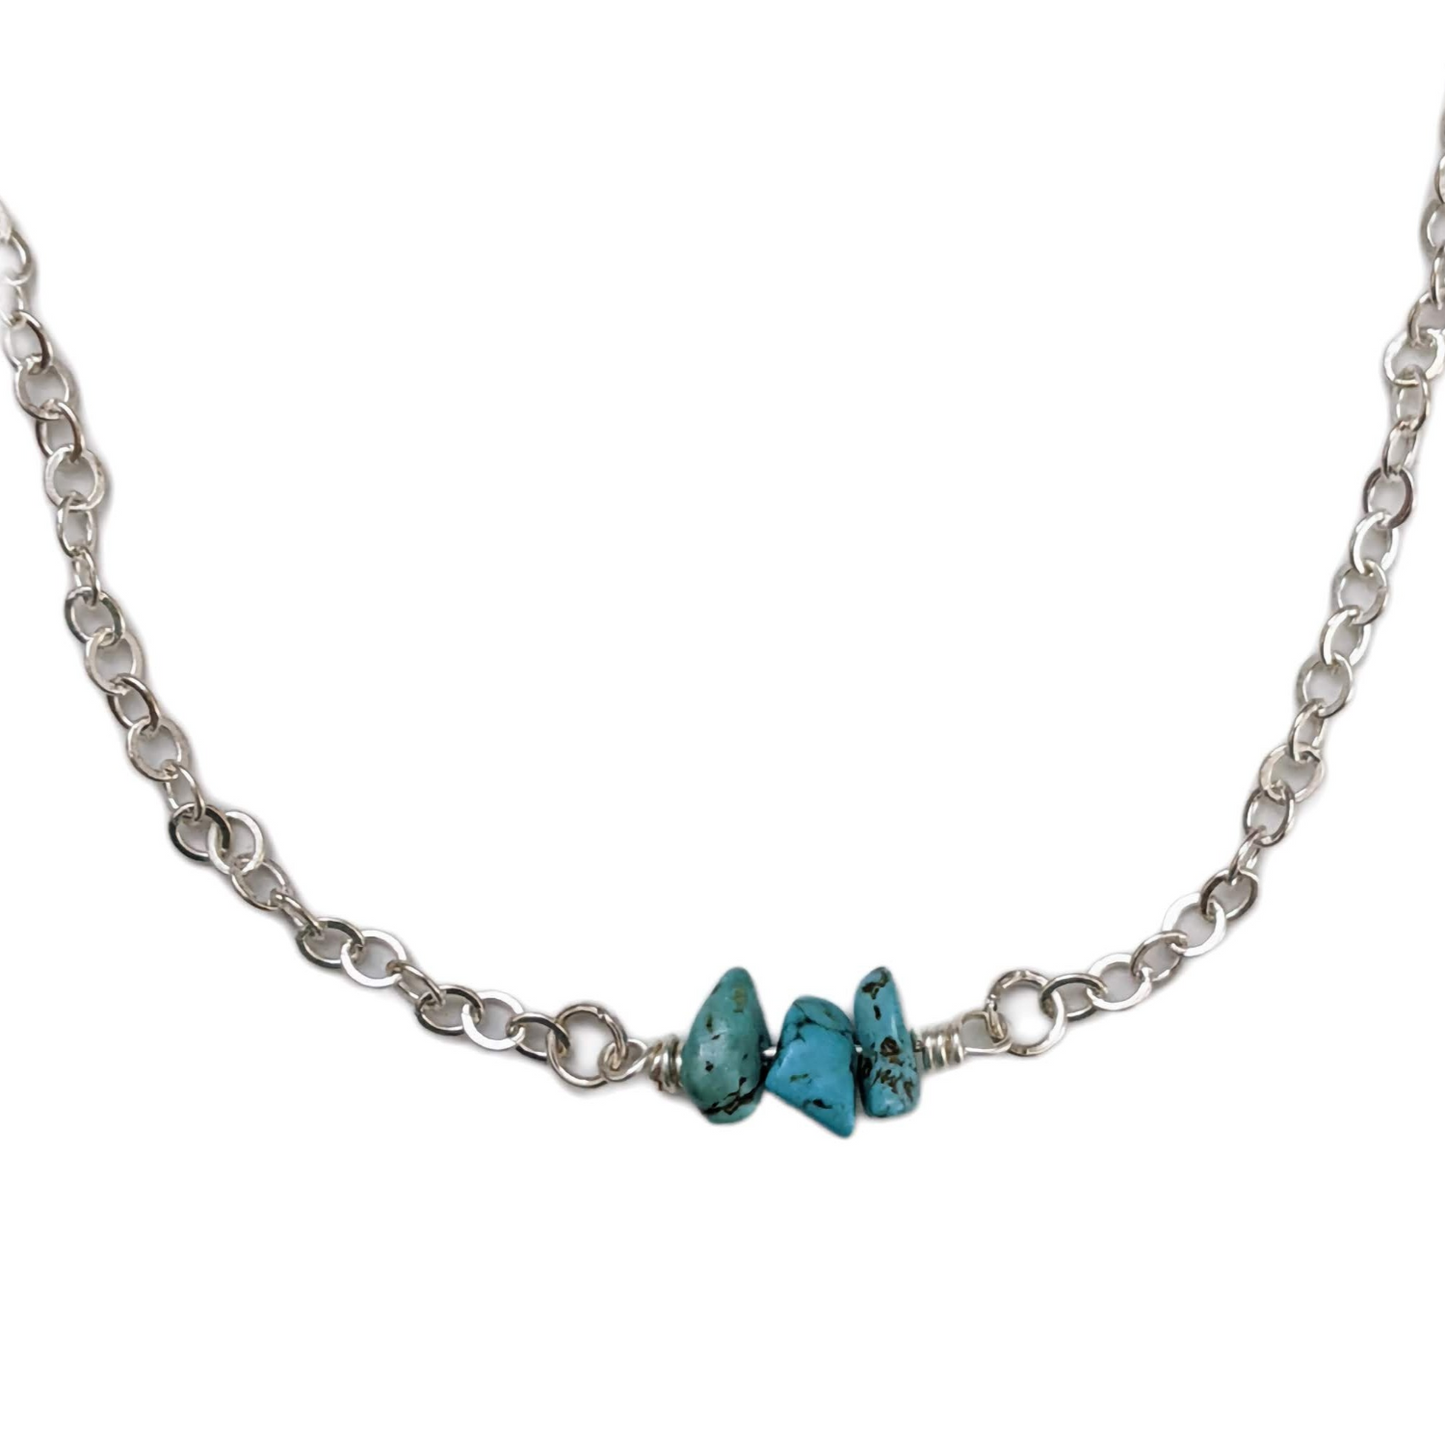 blue turquoise stones on a silver necklace chain